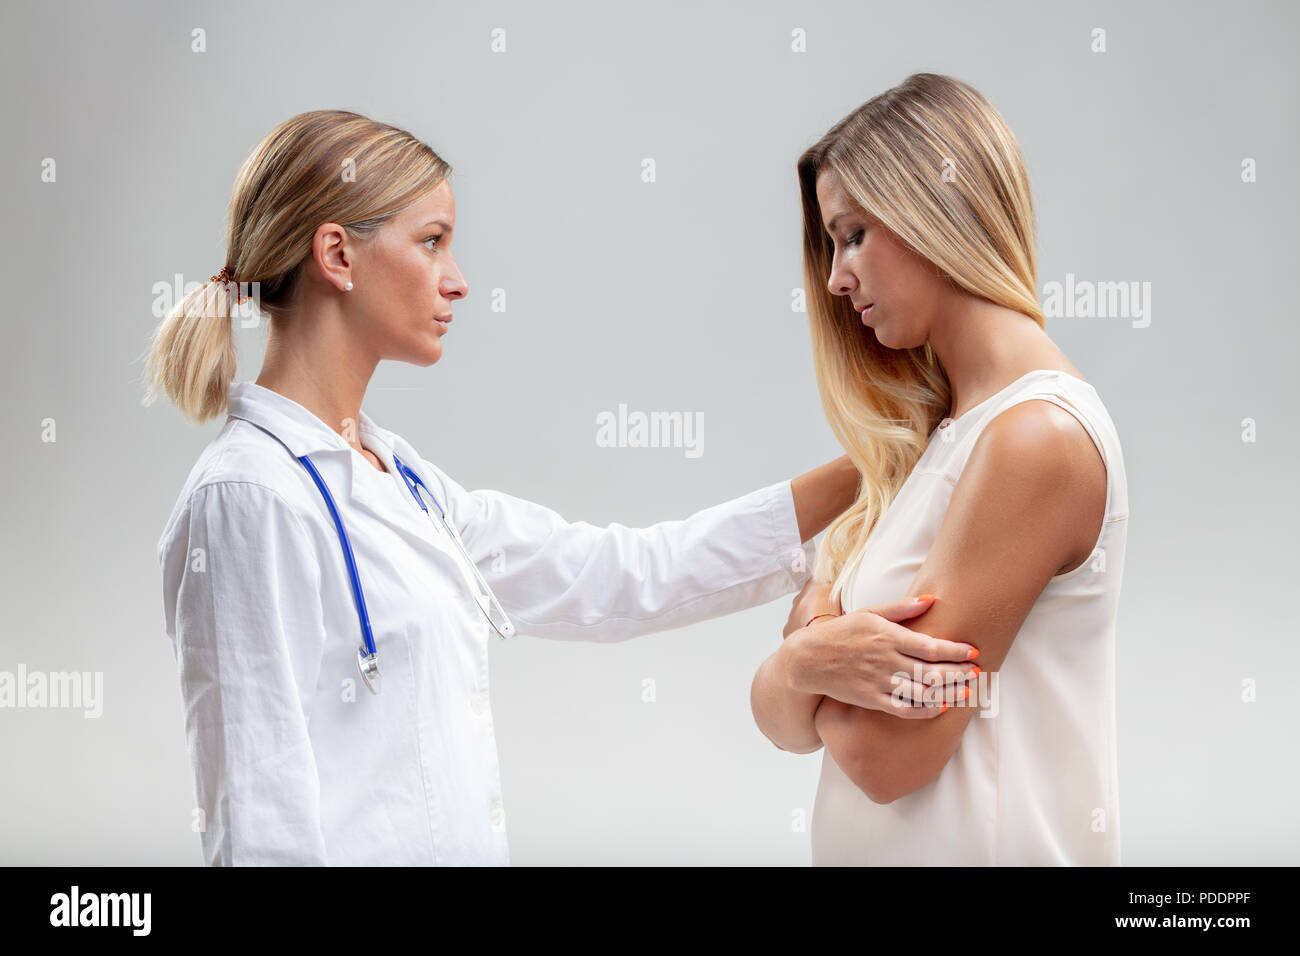 Serious woman doctor showing empathy for a young female patient reaching out a comforting hand to her shoulder in a close up side view Stock Photo